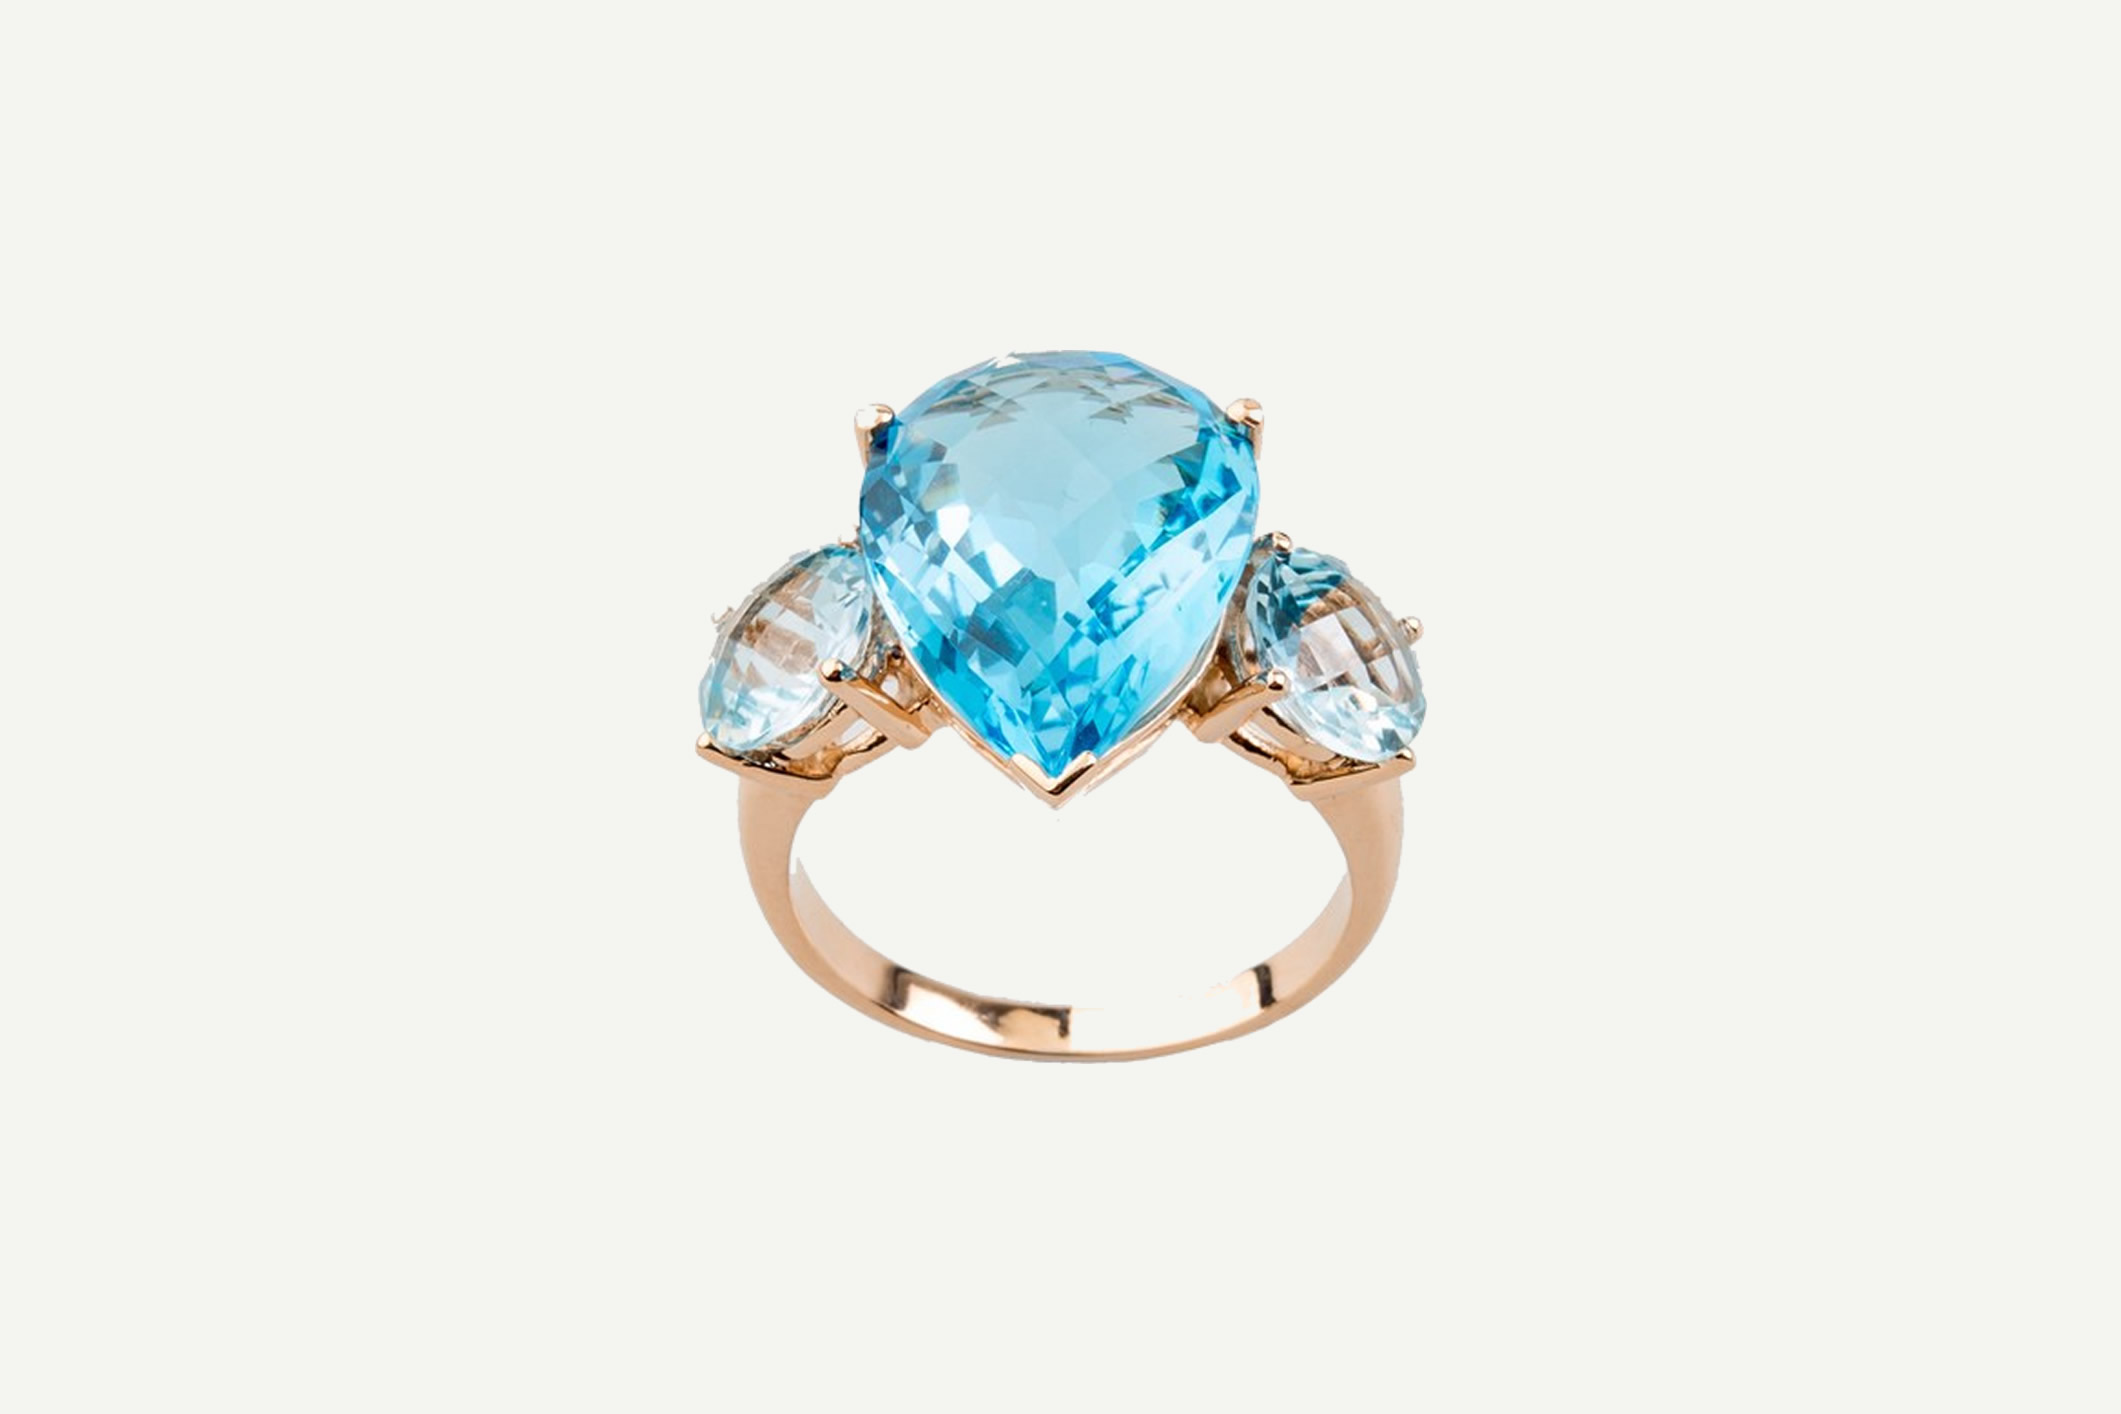 Setenta y Nueve ring in rose gold with Swiss blue topaz and Sky blue topaz